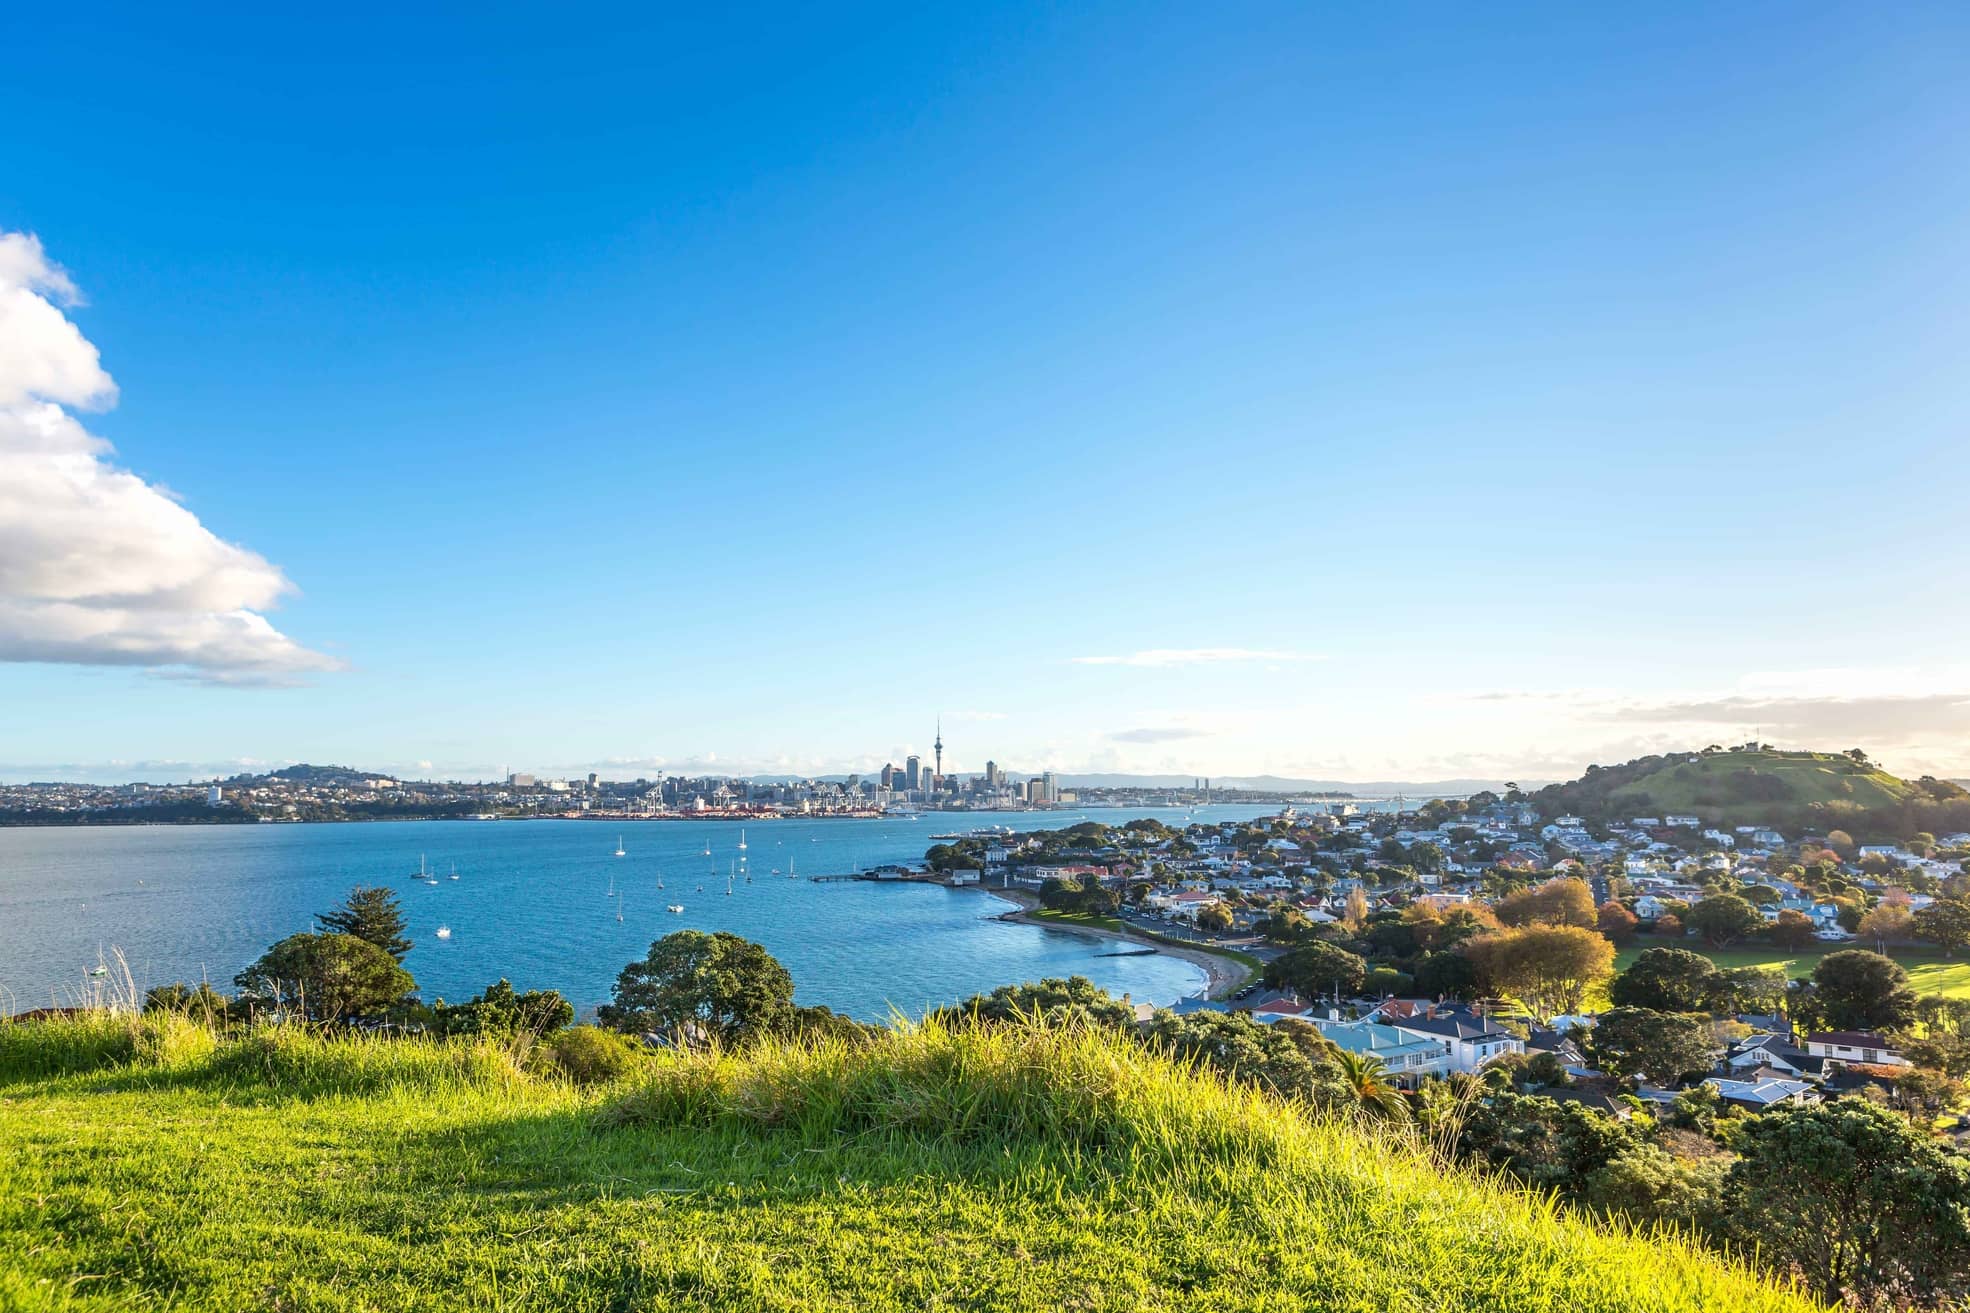 20 things in Auckland for under $20